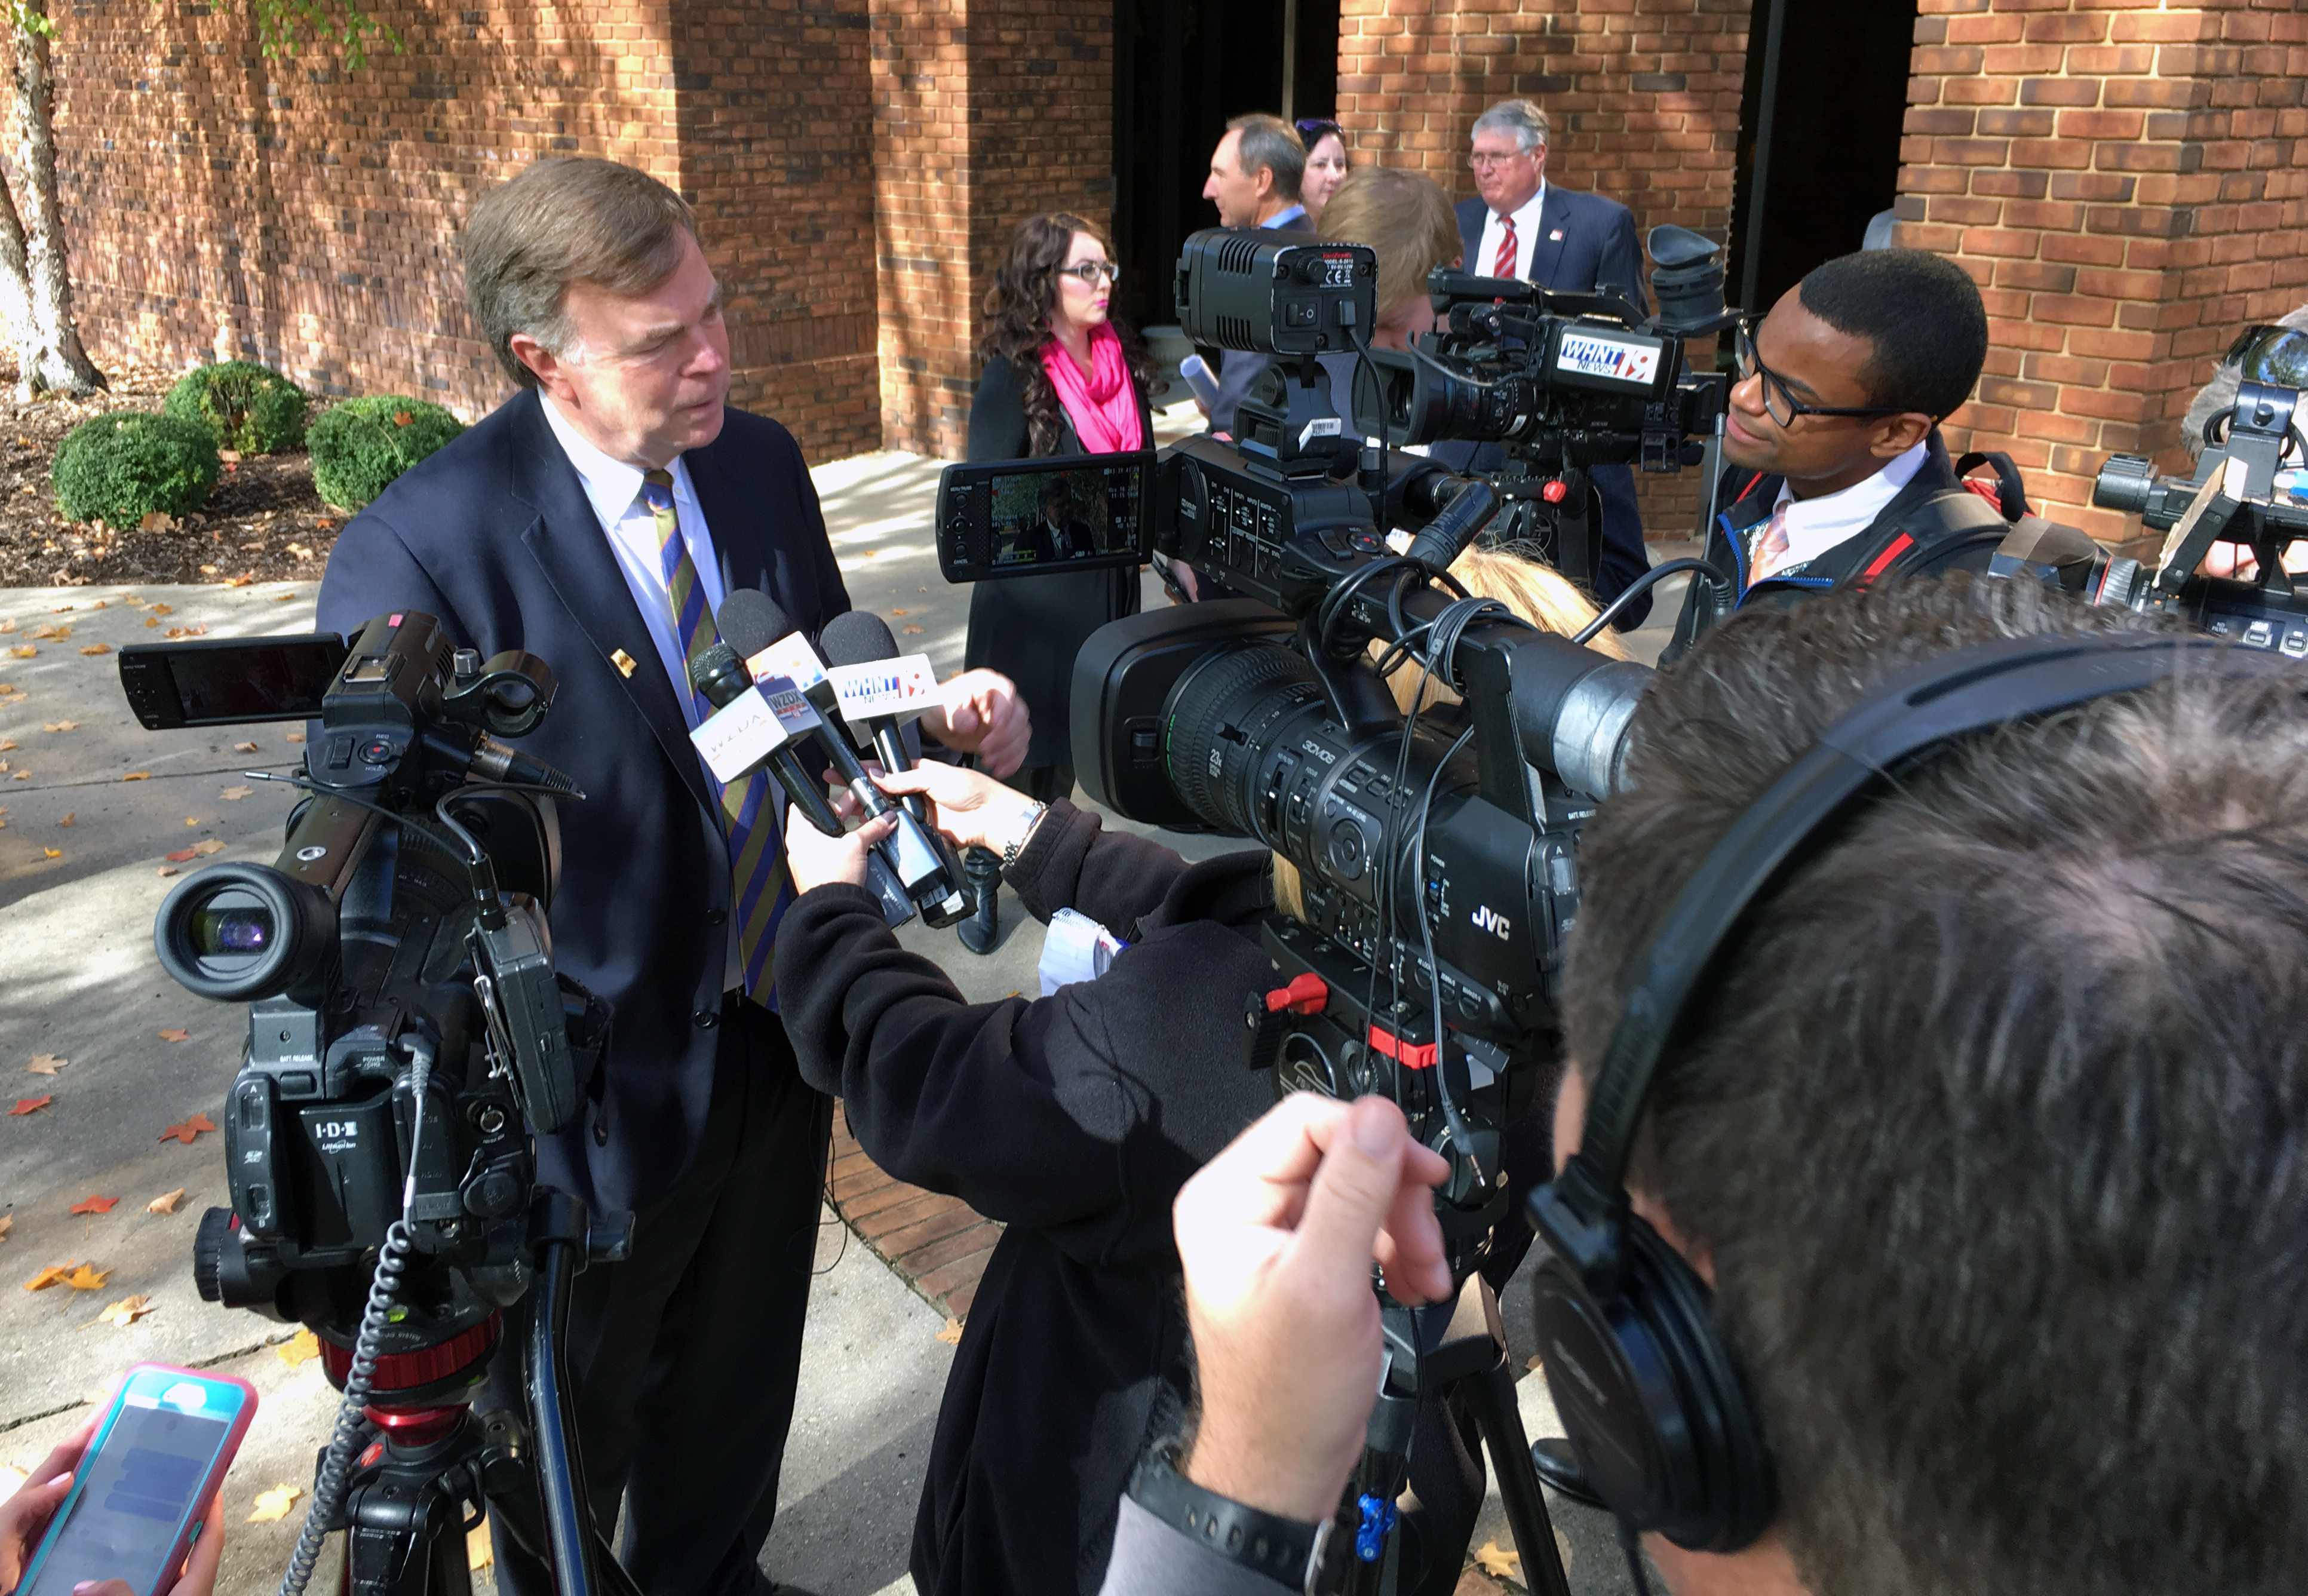 Reporters ask Mayor Battle about Huntsville's ongoing success - "What's the big secret?"